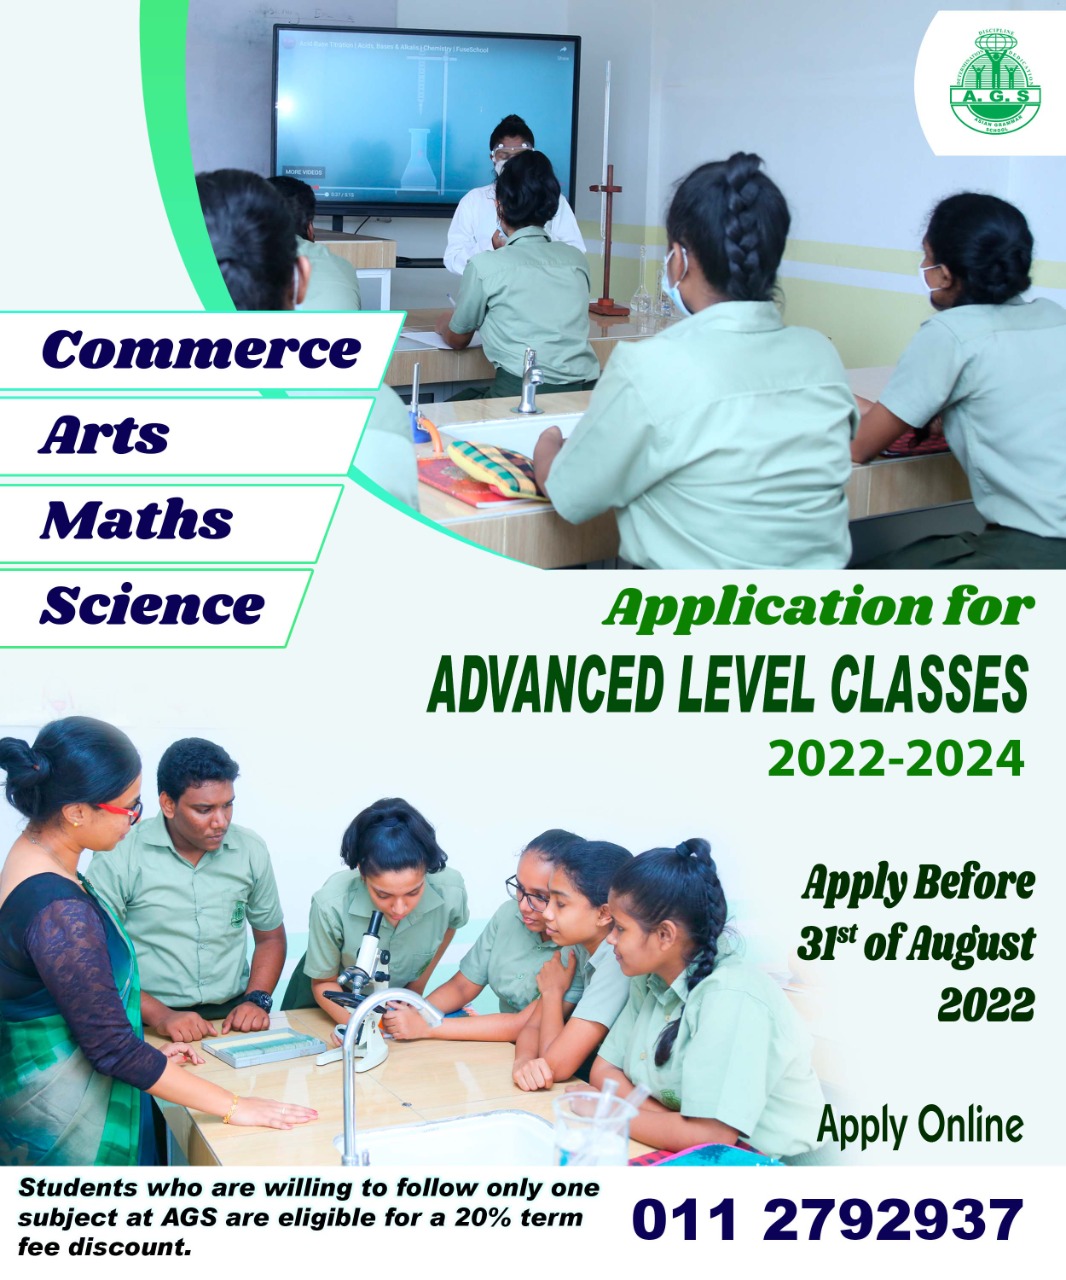 Application for Advanced Level Classes 2022 – 2024